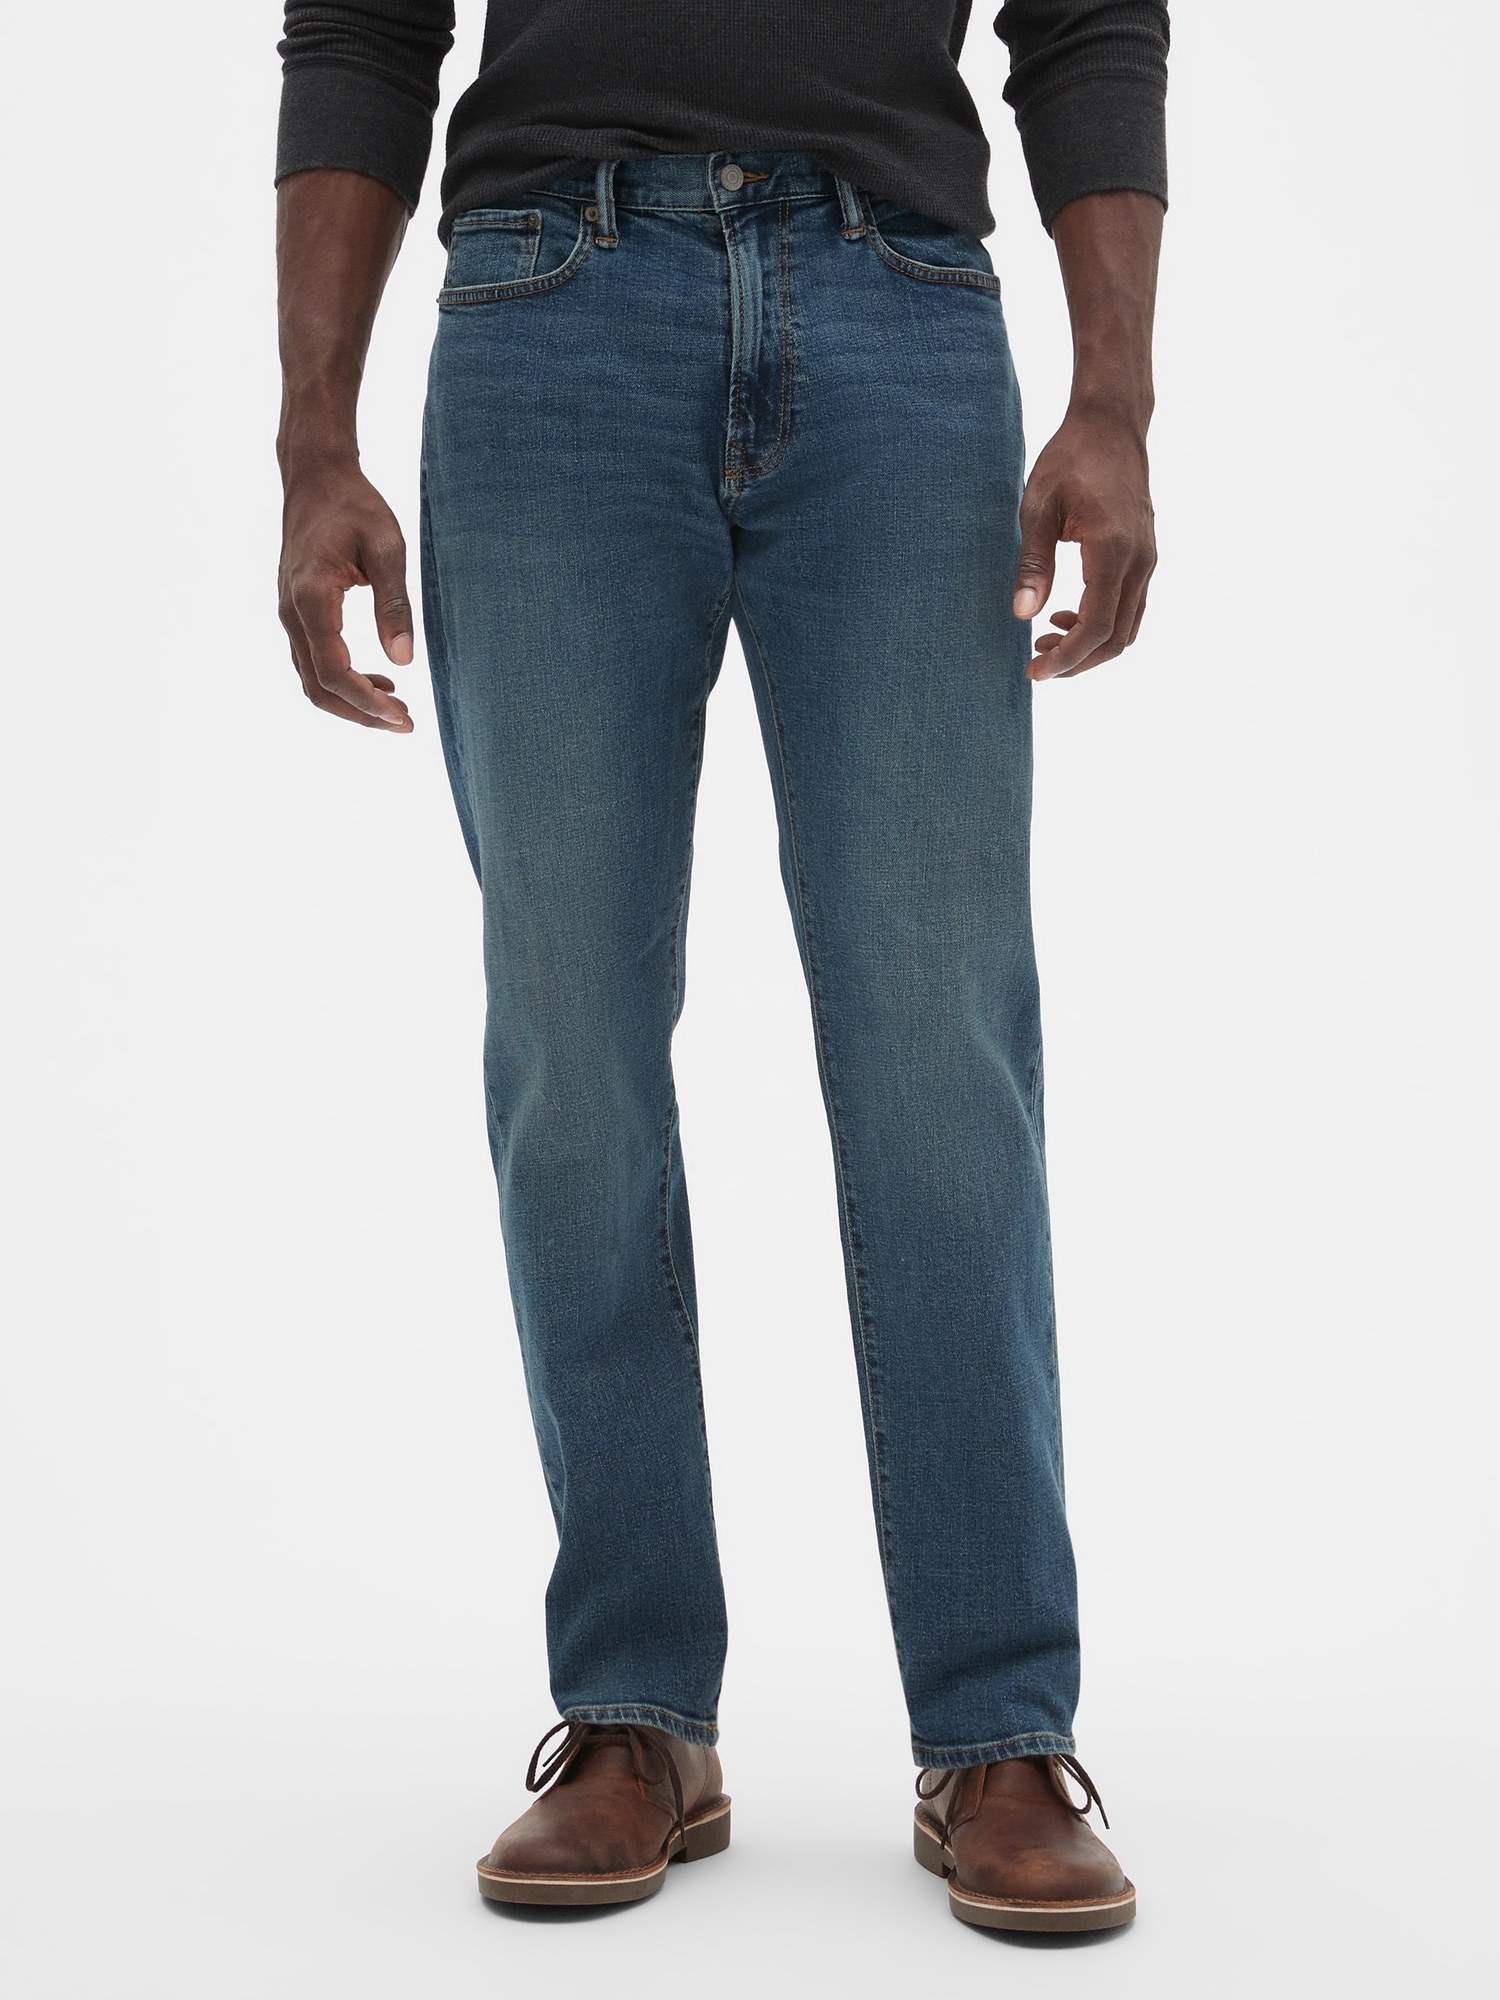 Athletic Taper Gapflex Jeans With Washwell™ | Gap Factory